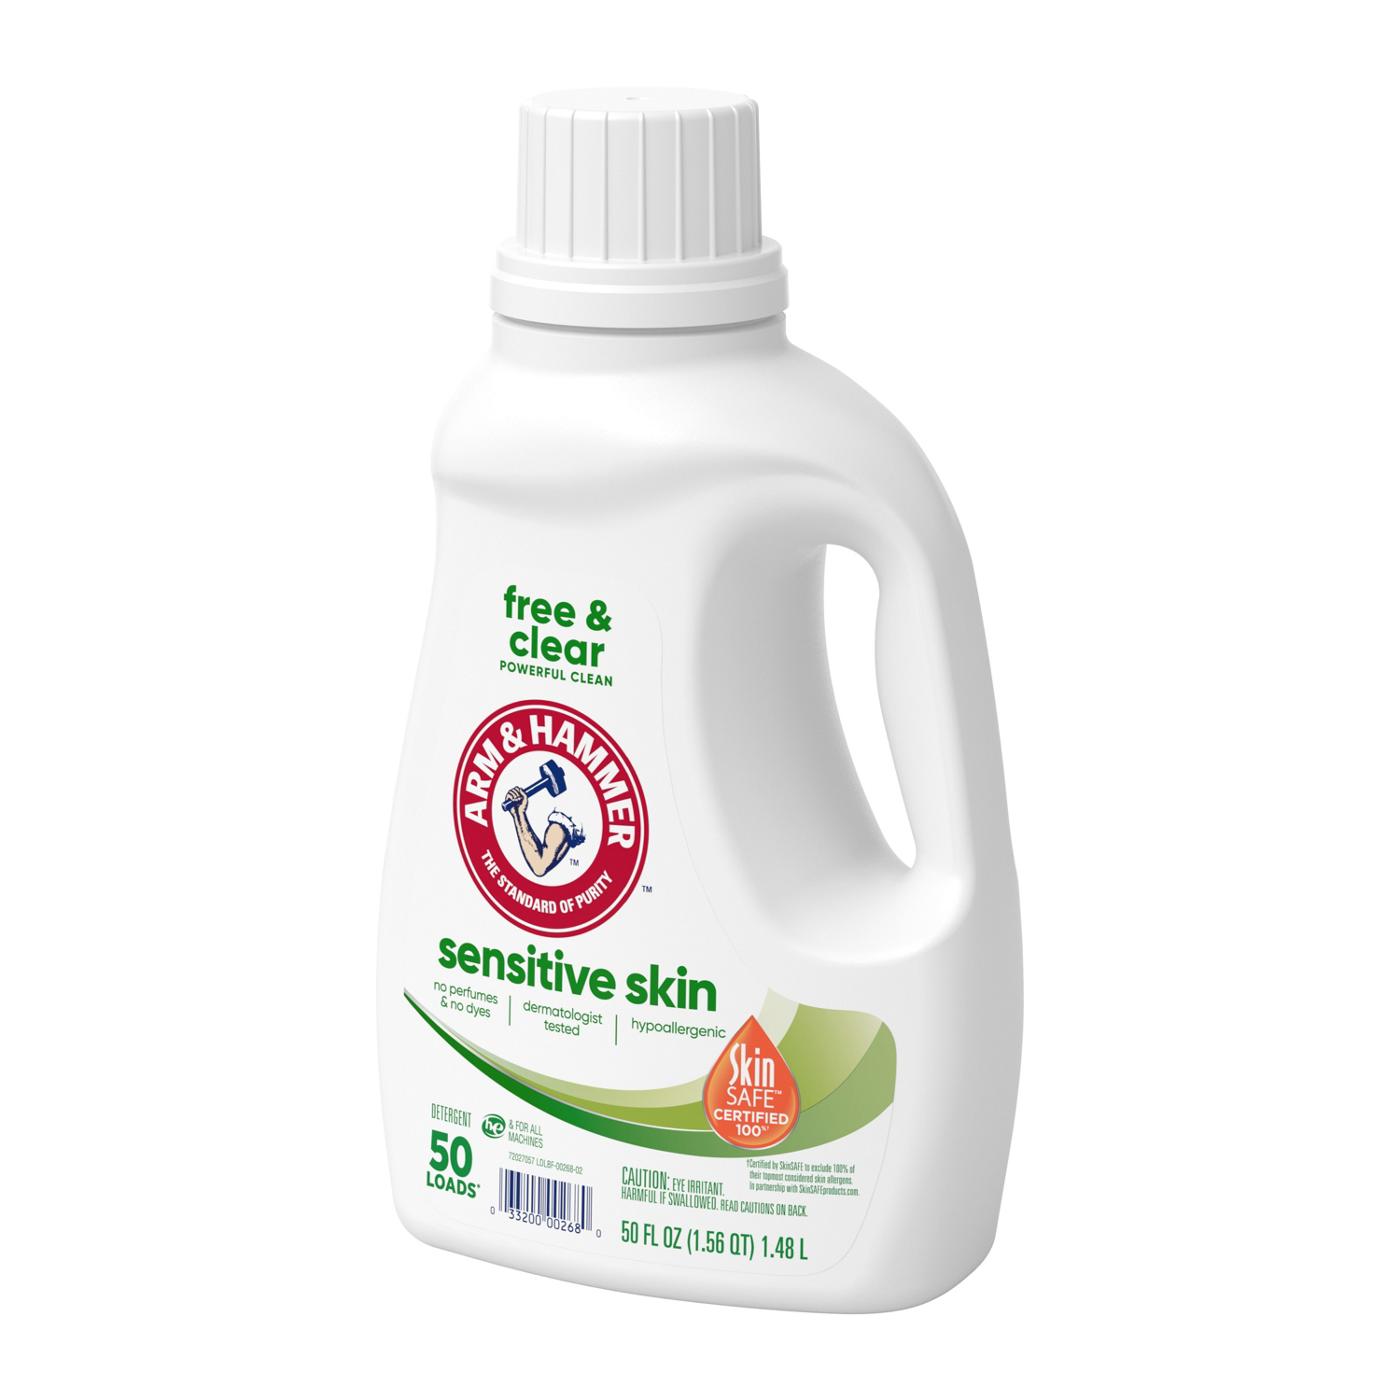 Arm & Hammer Free & Clear Sensitive Skin HE Liquid Laundry Detergent, 50 Loads; image 4 of 4